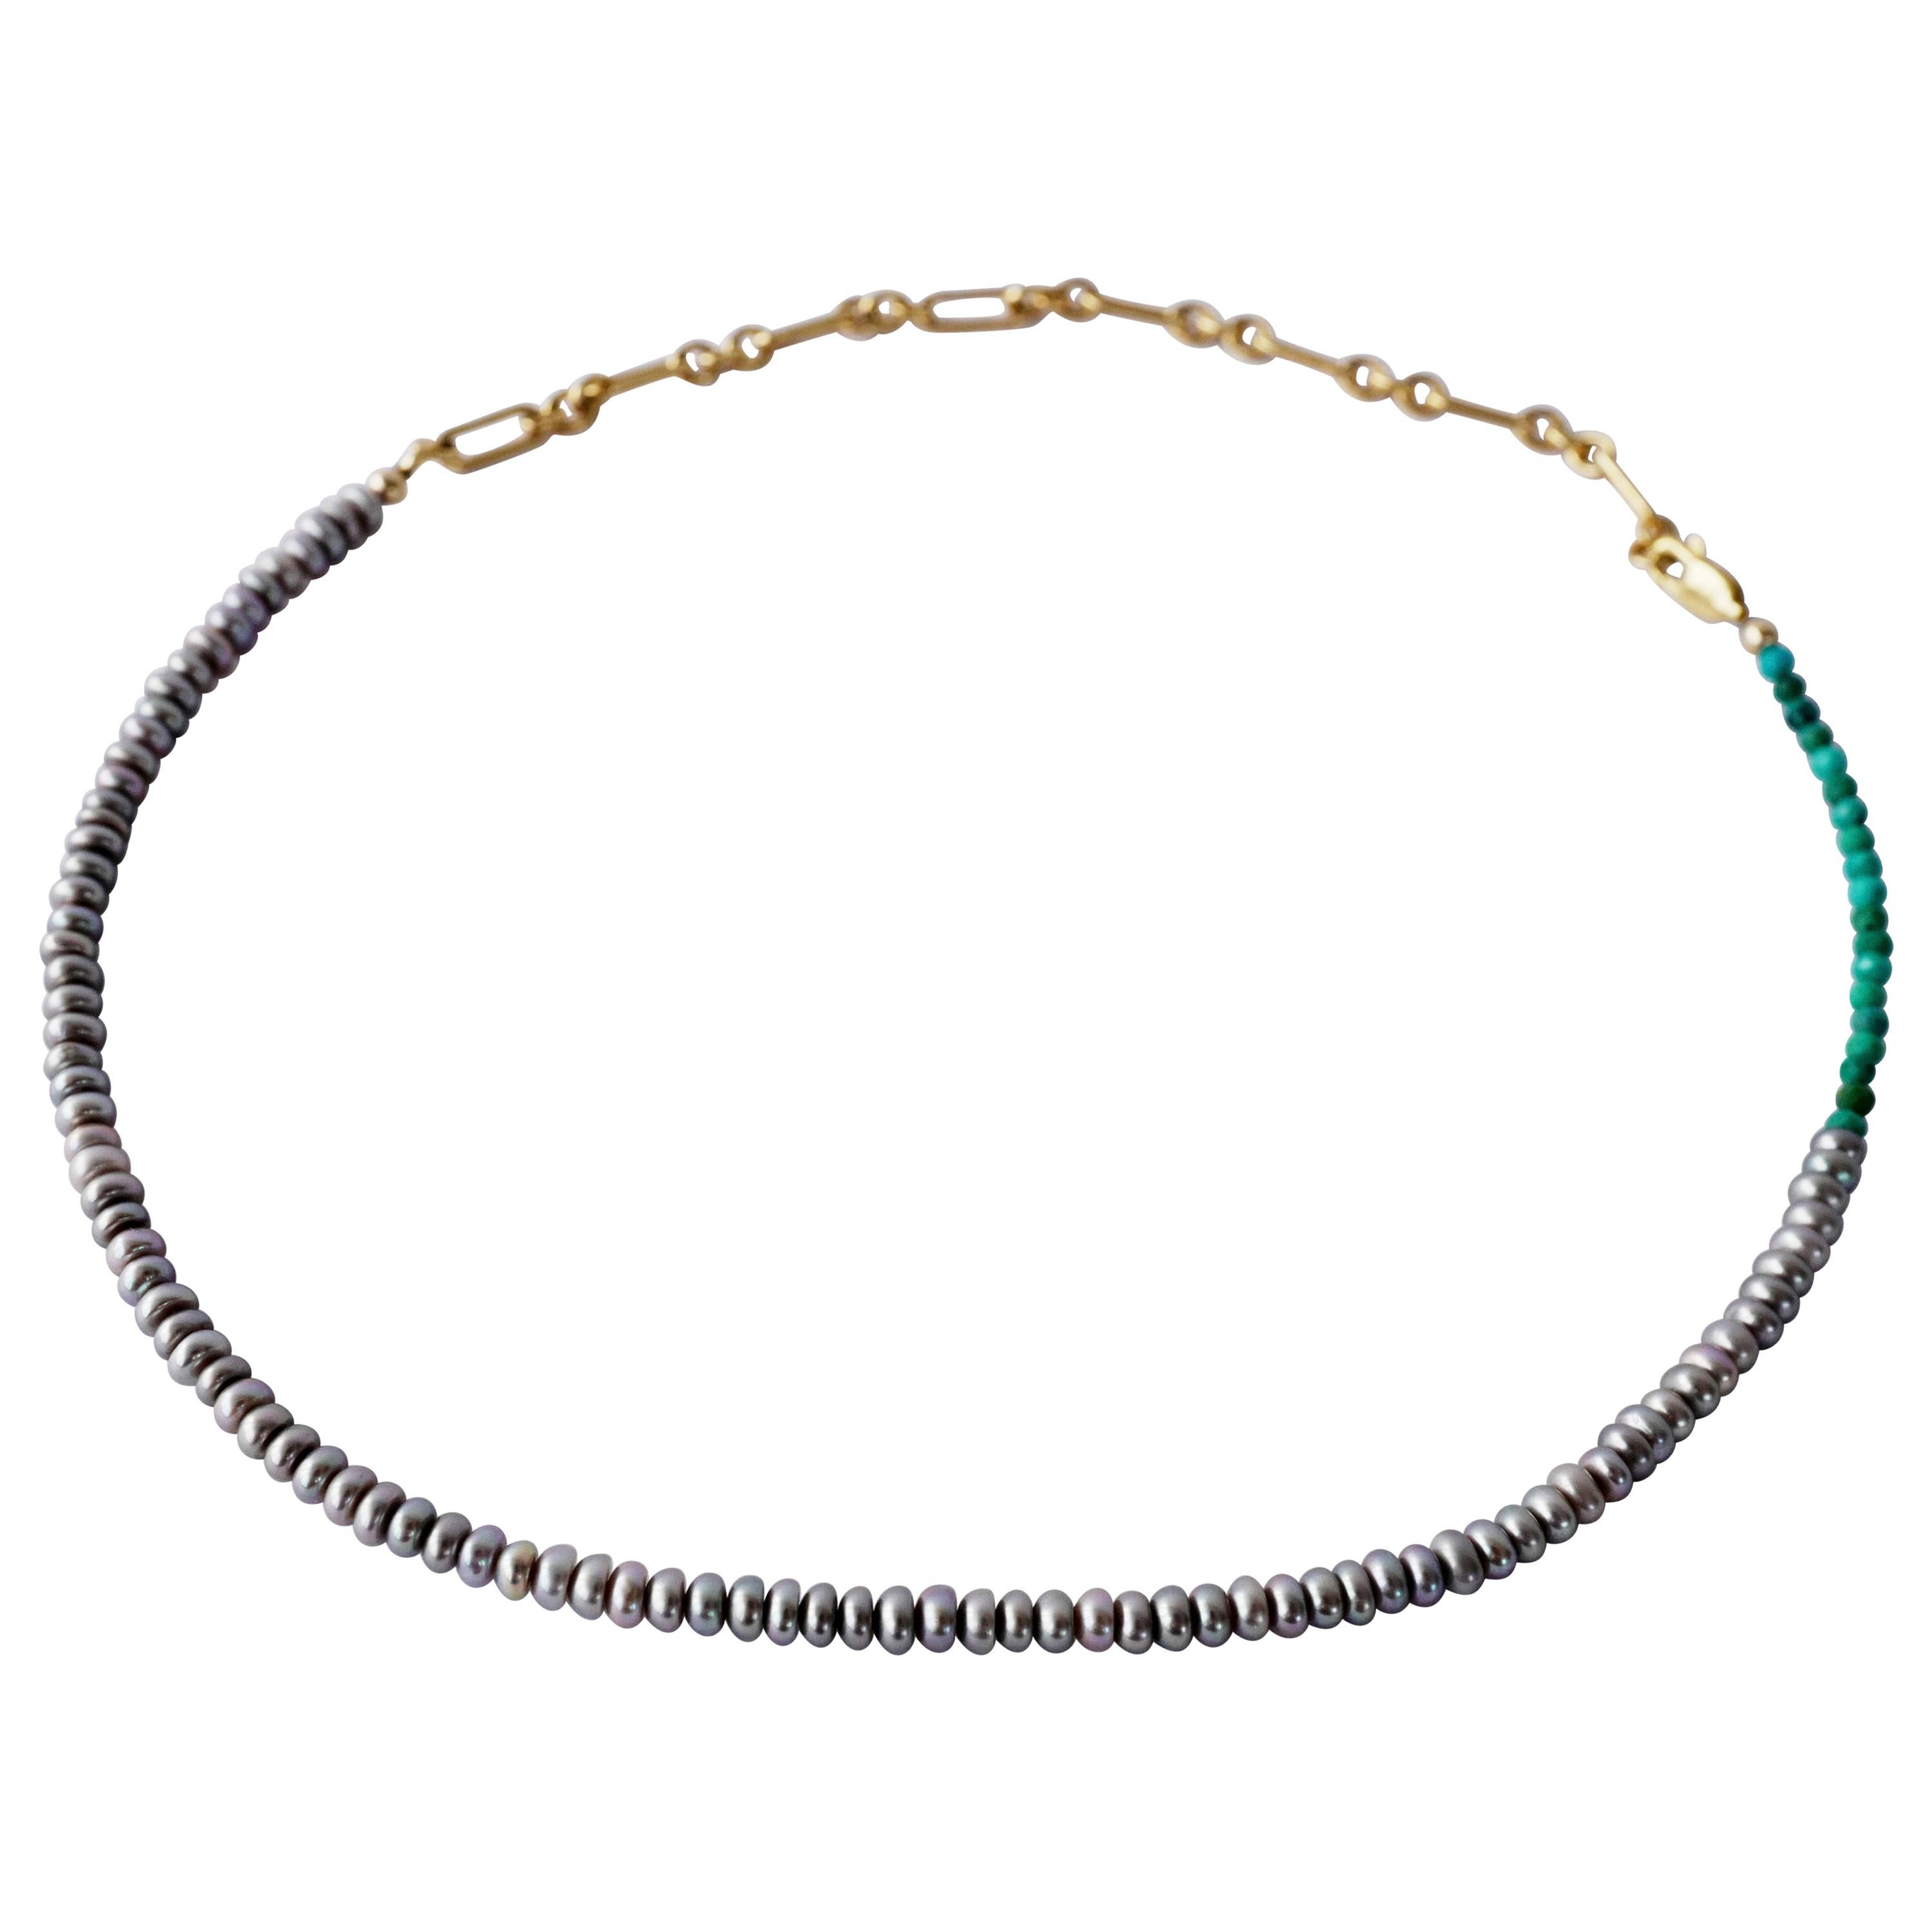 Turquoise Pearl  Beaded Choker Necklace  Gold Filled Chain J Dauphin